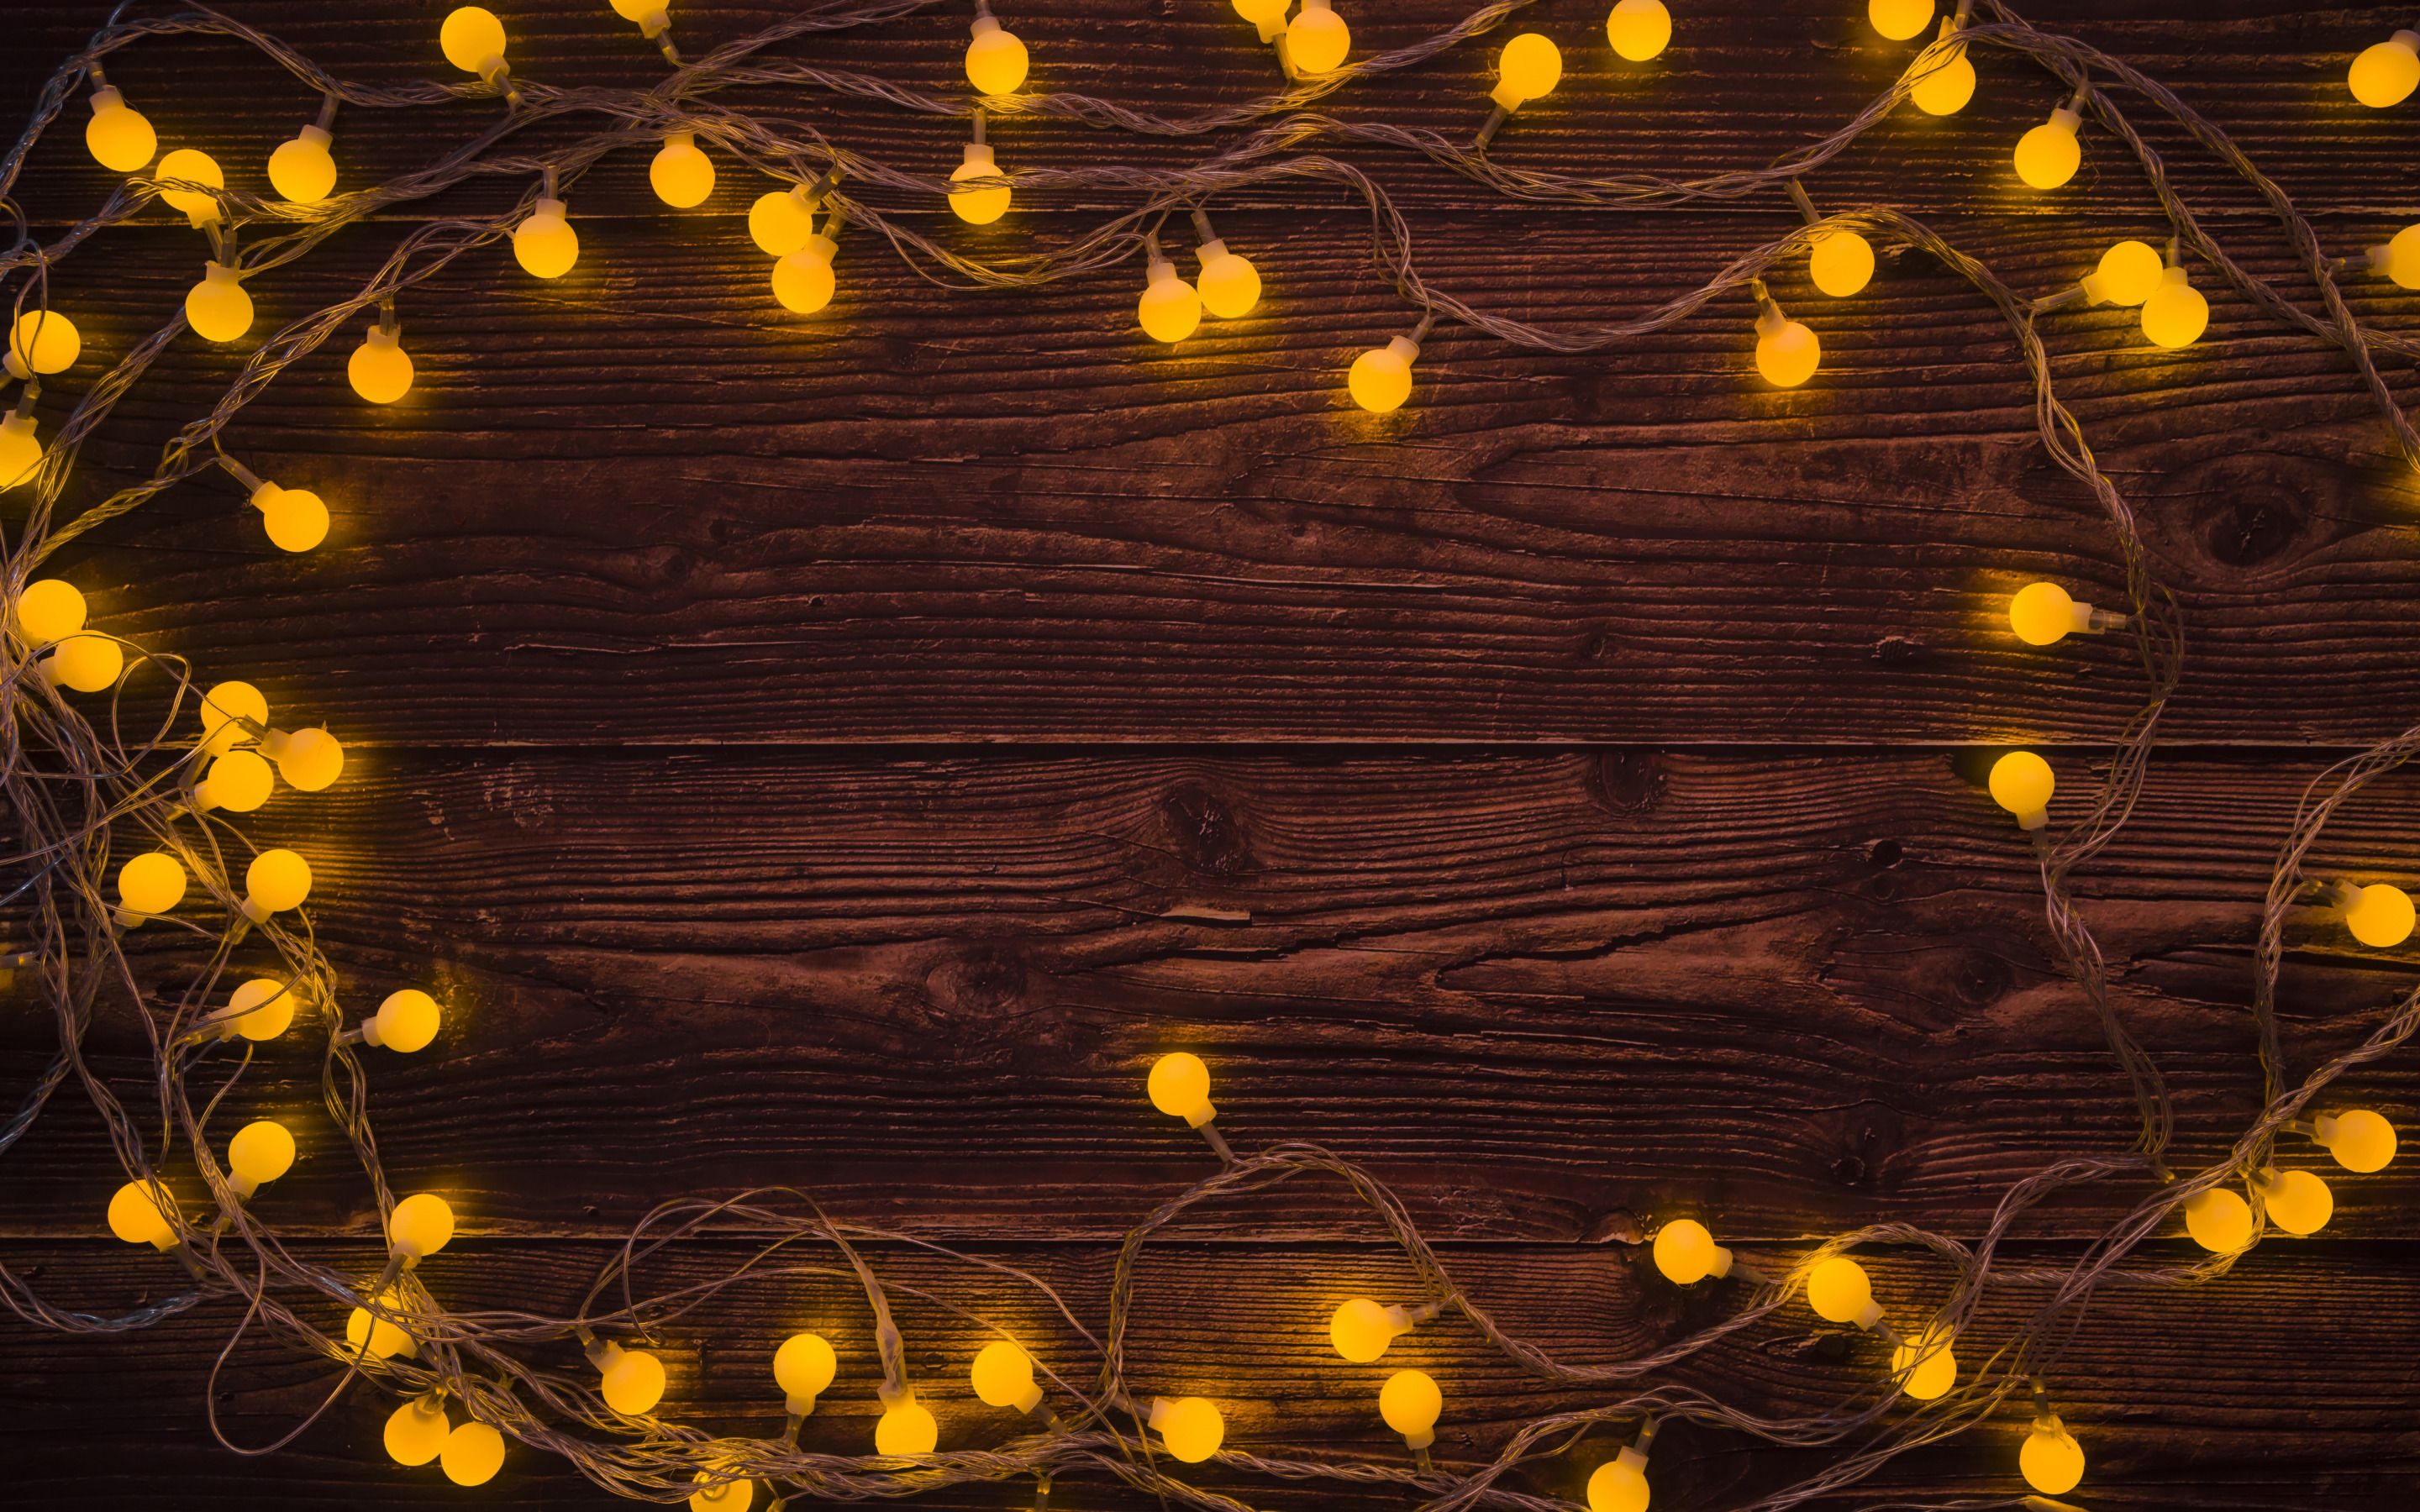 Download wallpaper wooden background, brown boards, garland, light bulbs, evening, Christmas, New Year for desktop with resolution 2880x1800. High Quality HD picture wallpaper